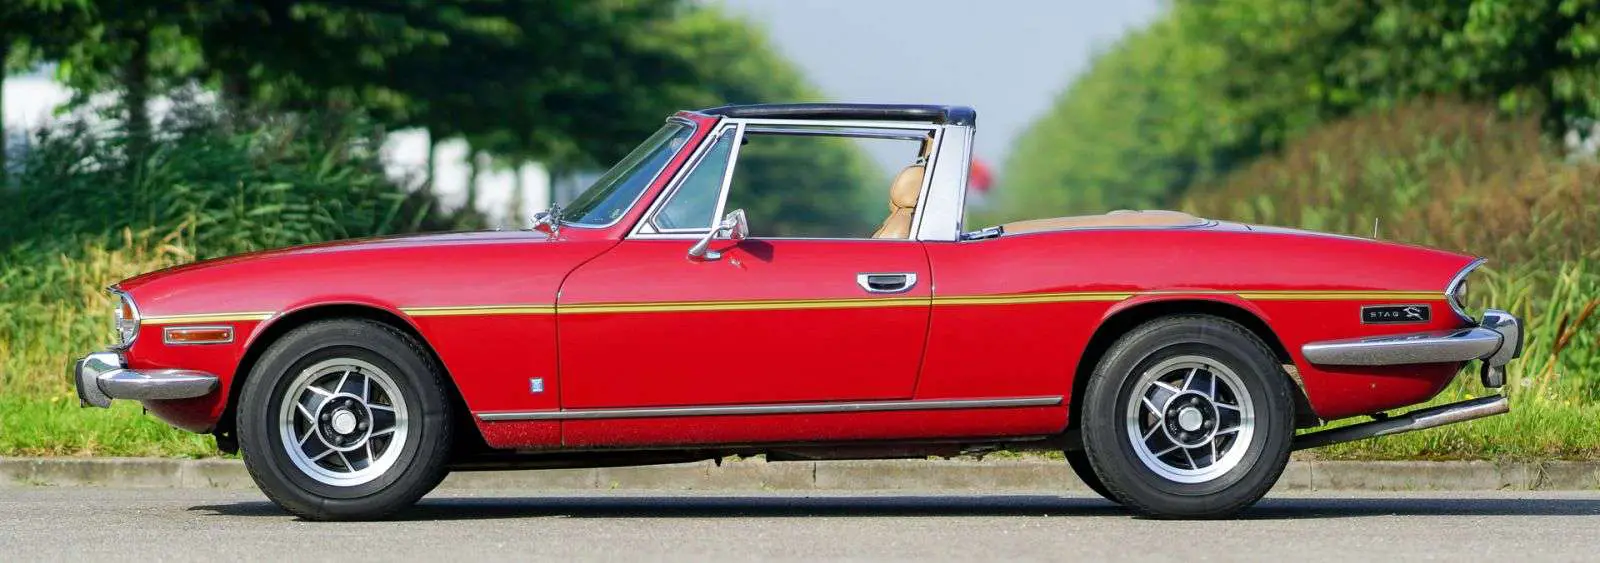 Classic Cars You Should Look to Invest In